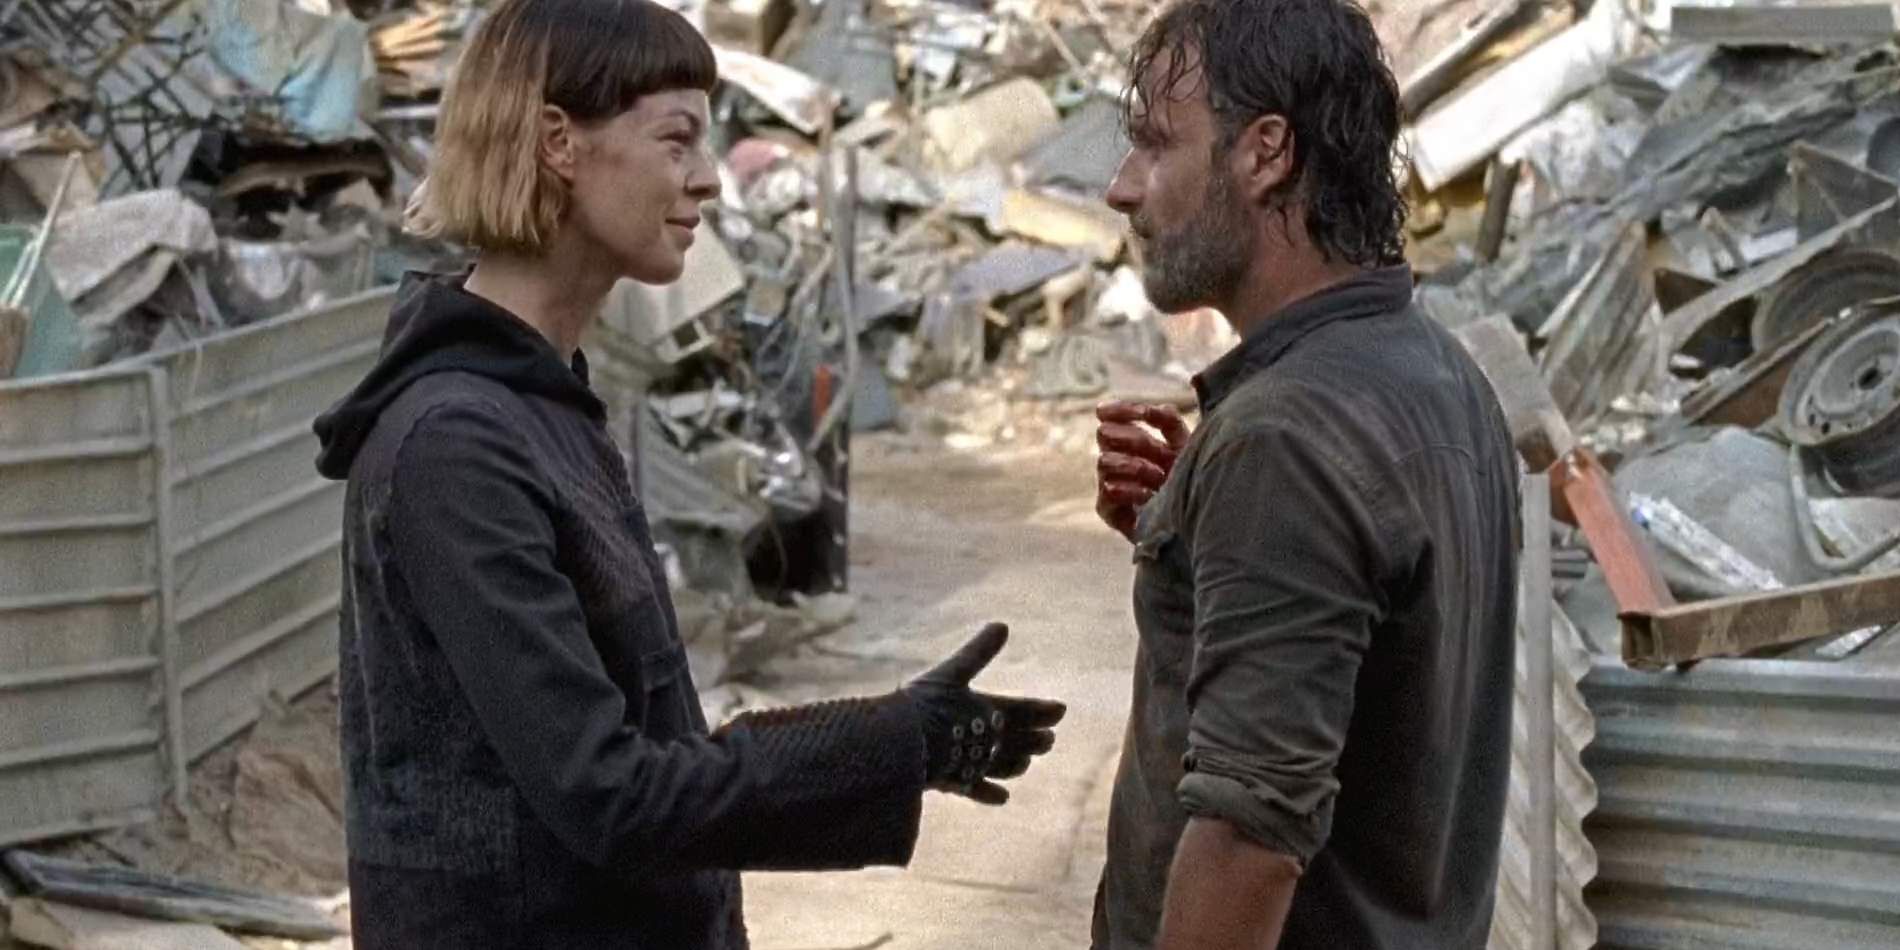 Pollyanna McIntosh as Jadis and Andrew Lincoln as Rick in The Walking Dead